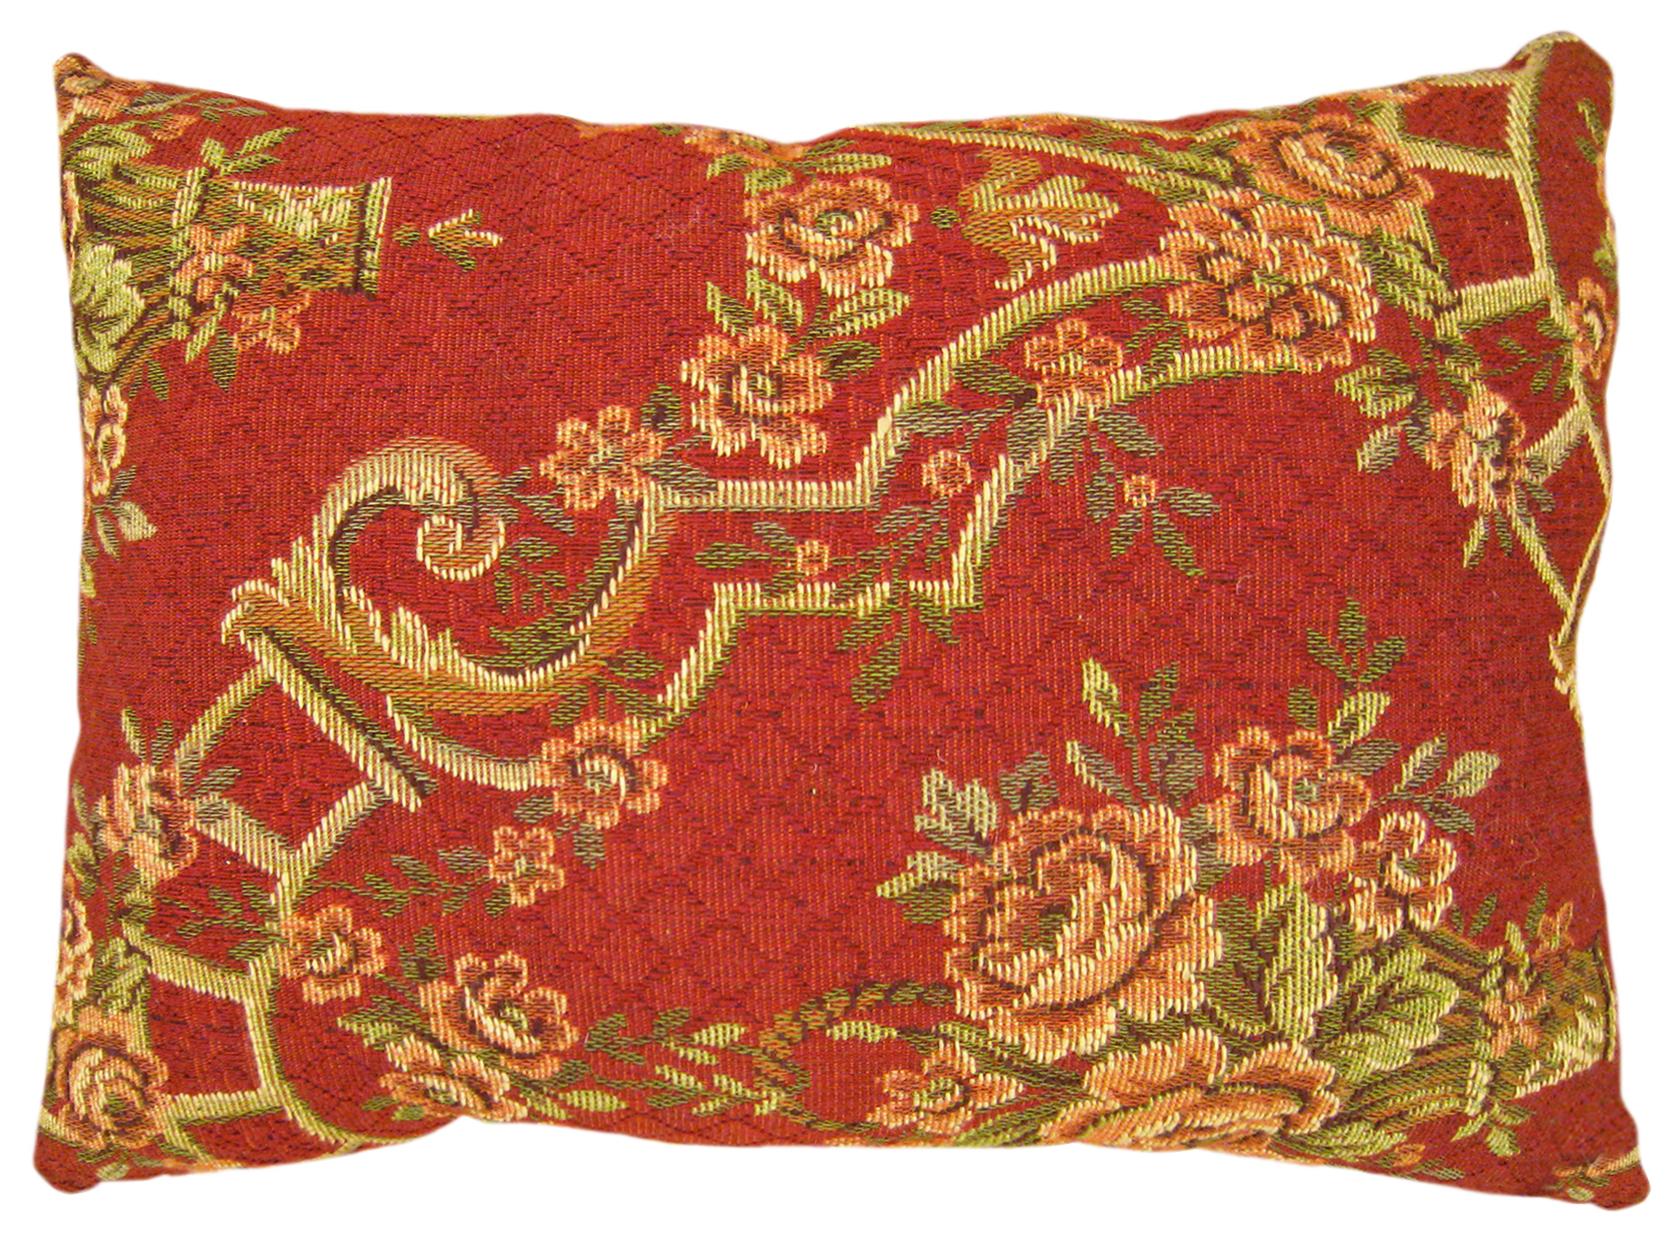 A Pair of Decorative Antique Jacquard Tapestry Pillows with Floral Elements  For Sale 2